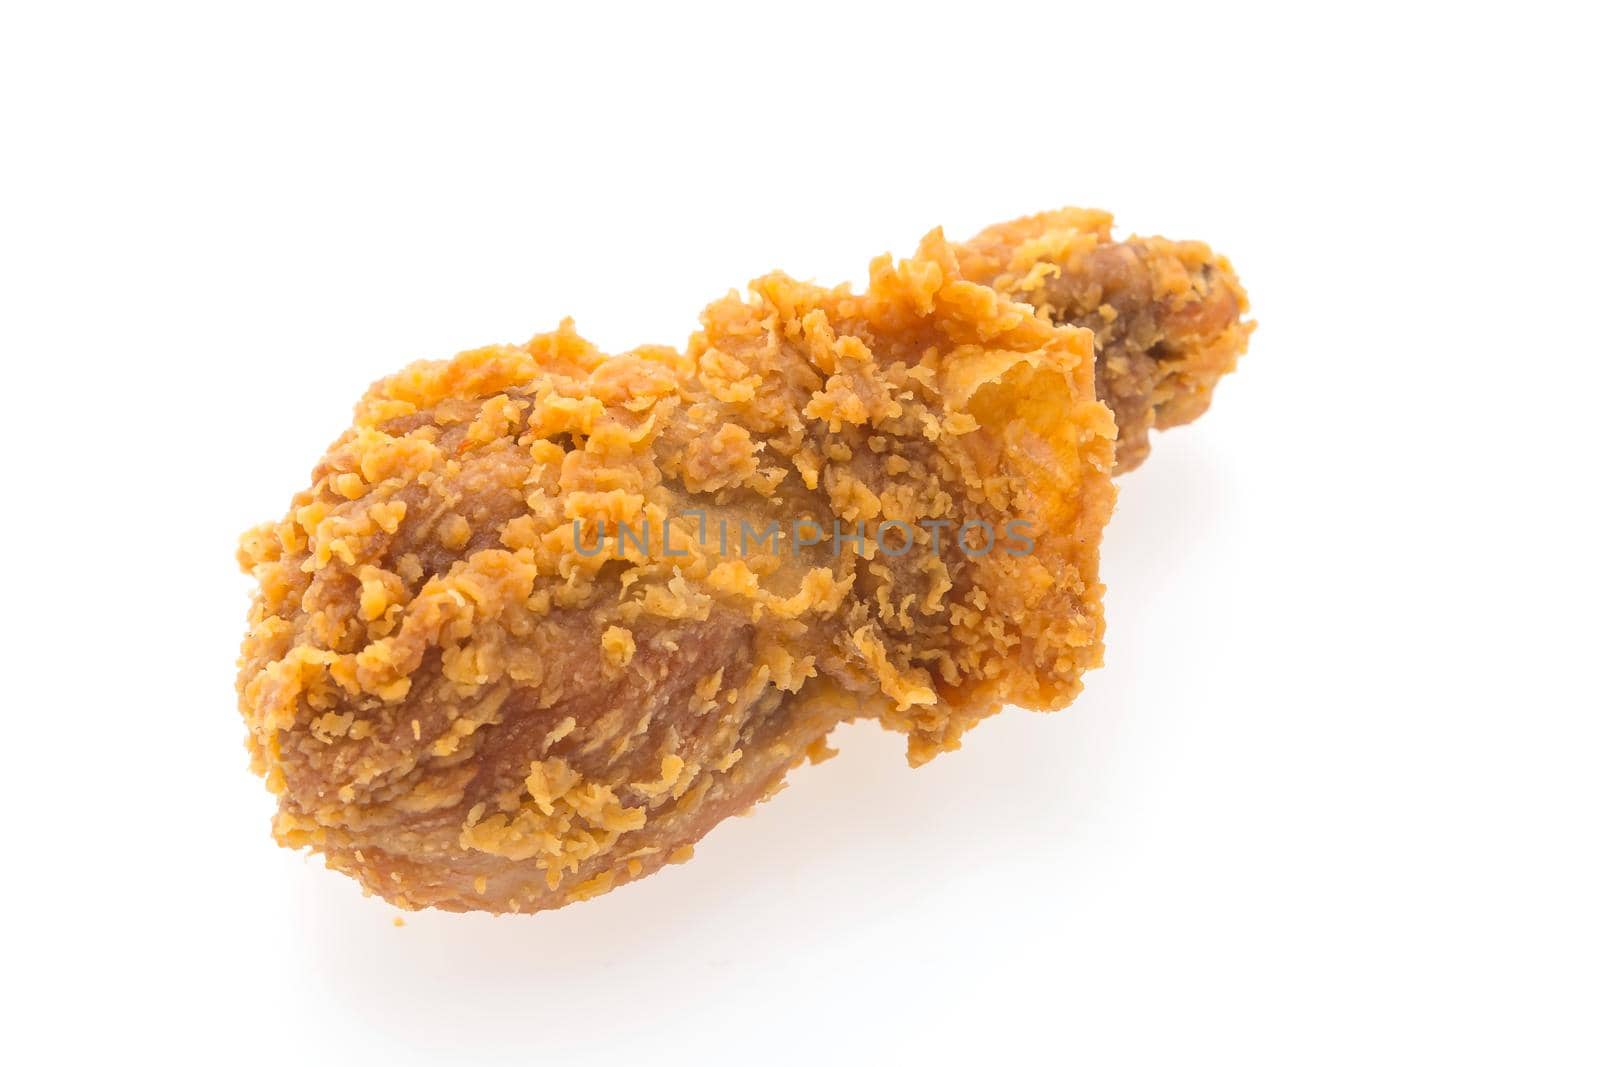 Fried chicken leg isolated on white background